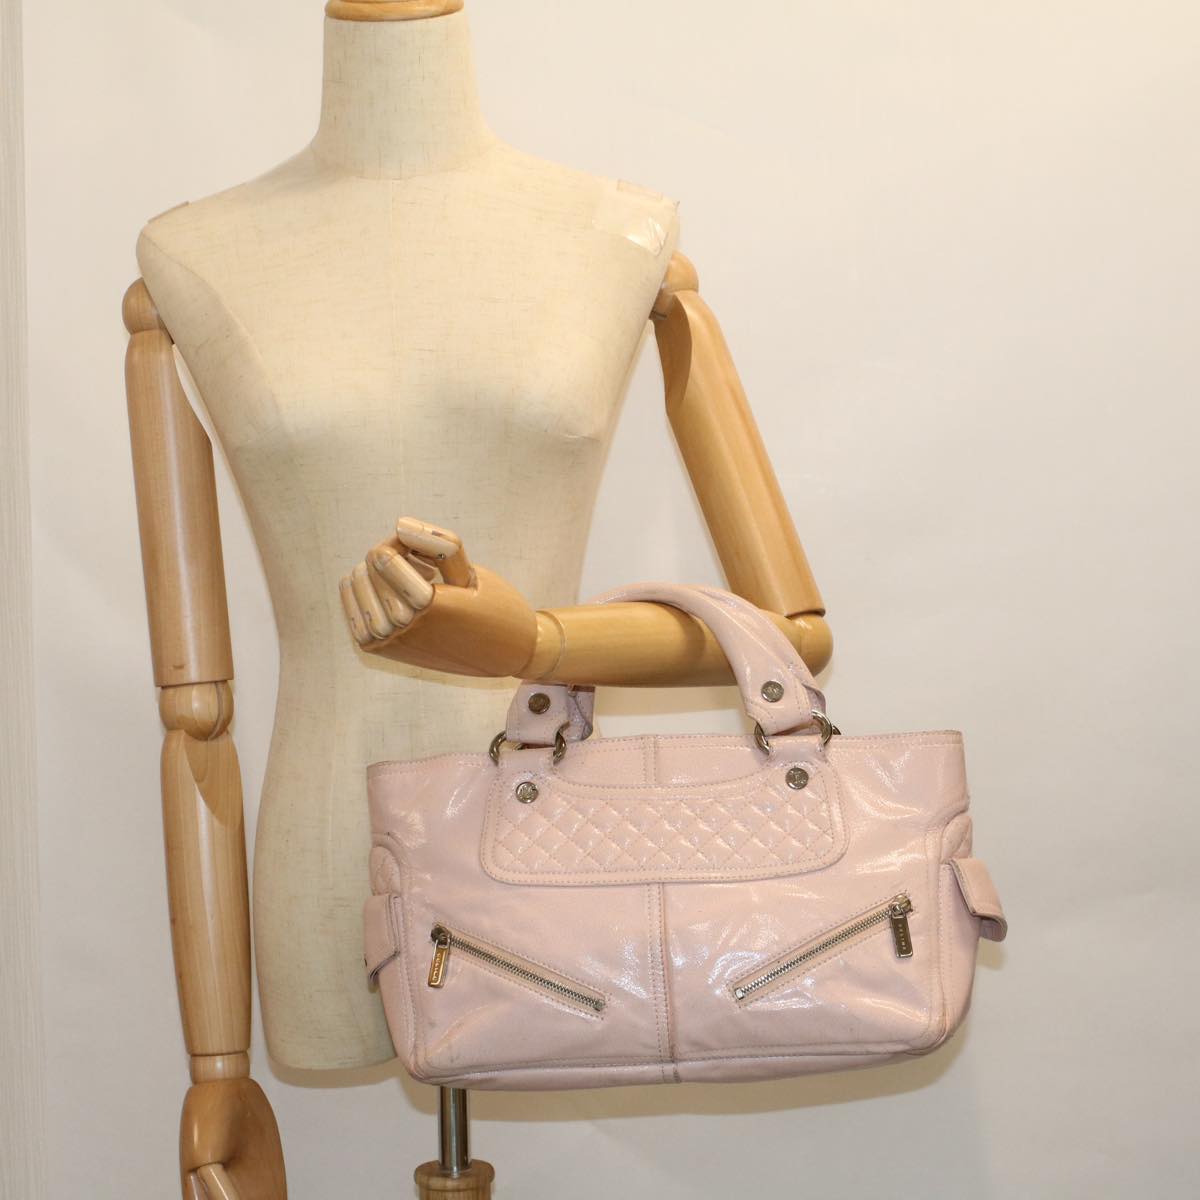 CELINE Hand Bag Leather Pink Auth bs9529